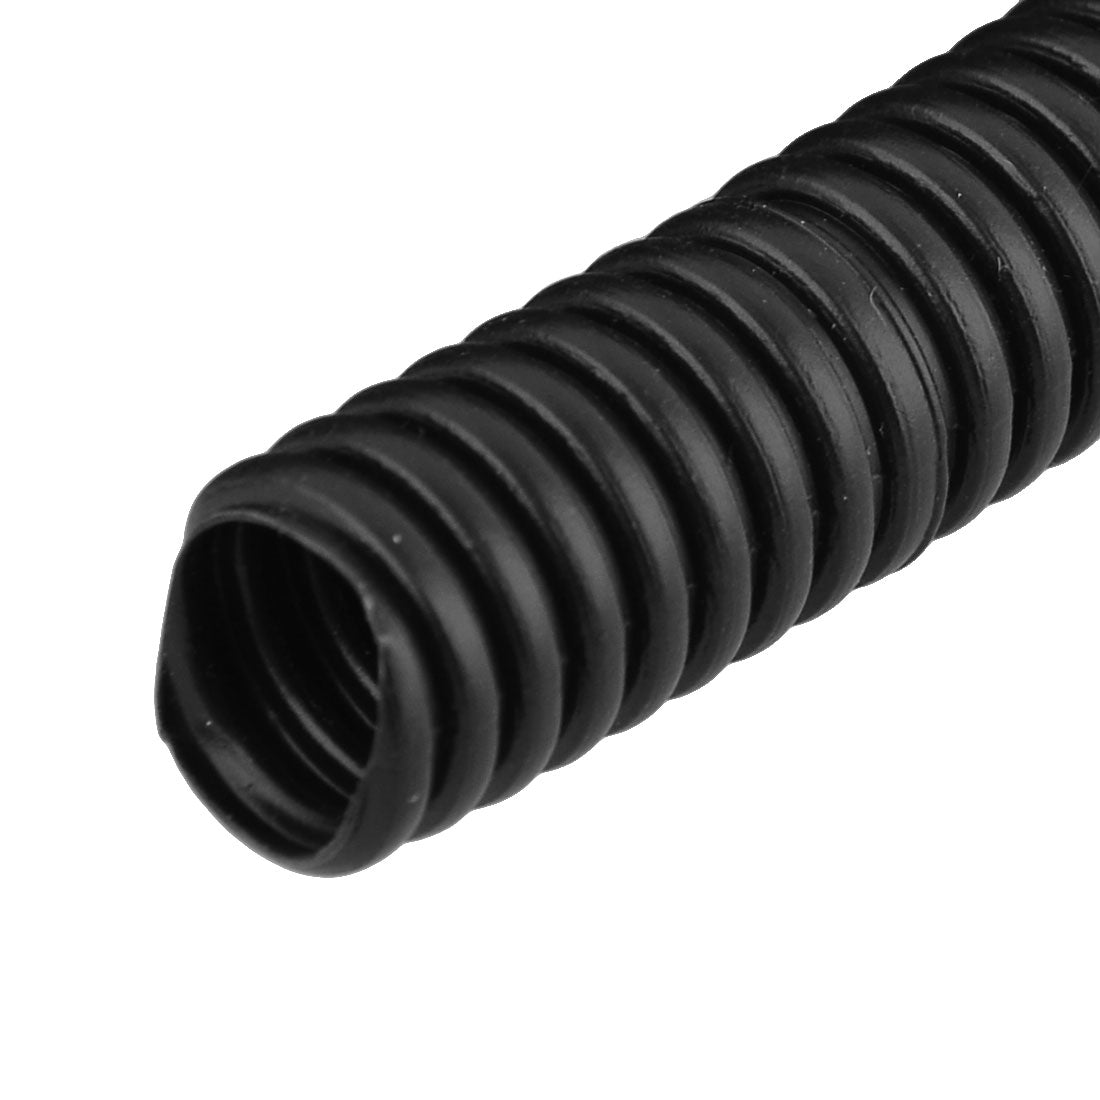 uxcell Uxcell 2.7 M 11 x 13 mm Plastic Corrugated Conduit Tube for Garden,Office Black